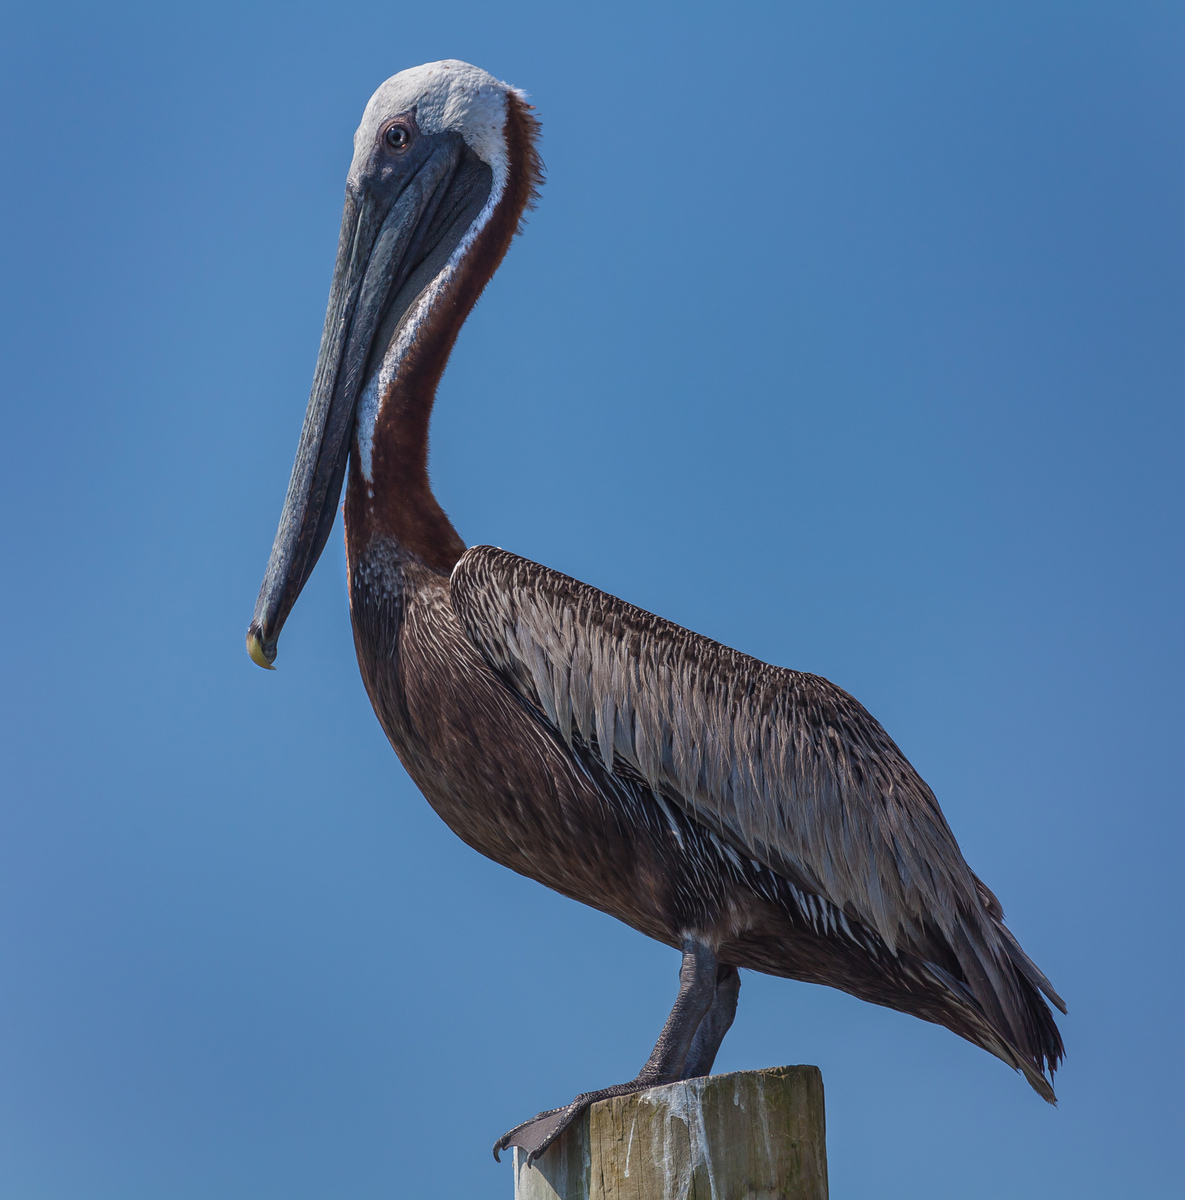 Close to the mouth of the river we see Caribbean Brown Pelicans like this adult male